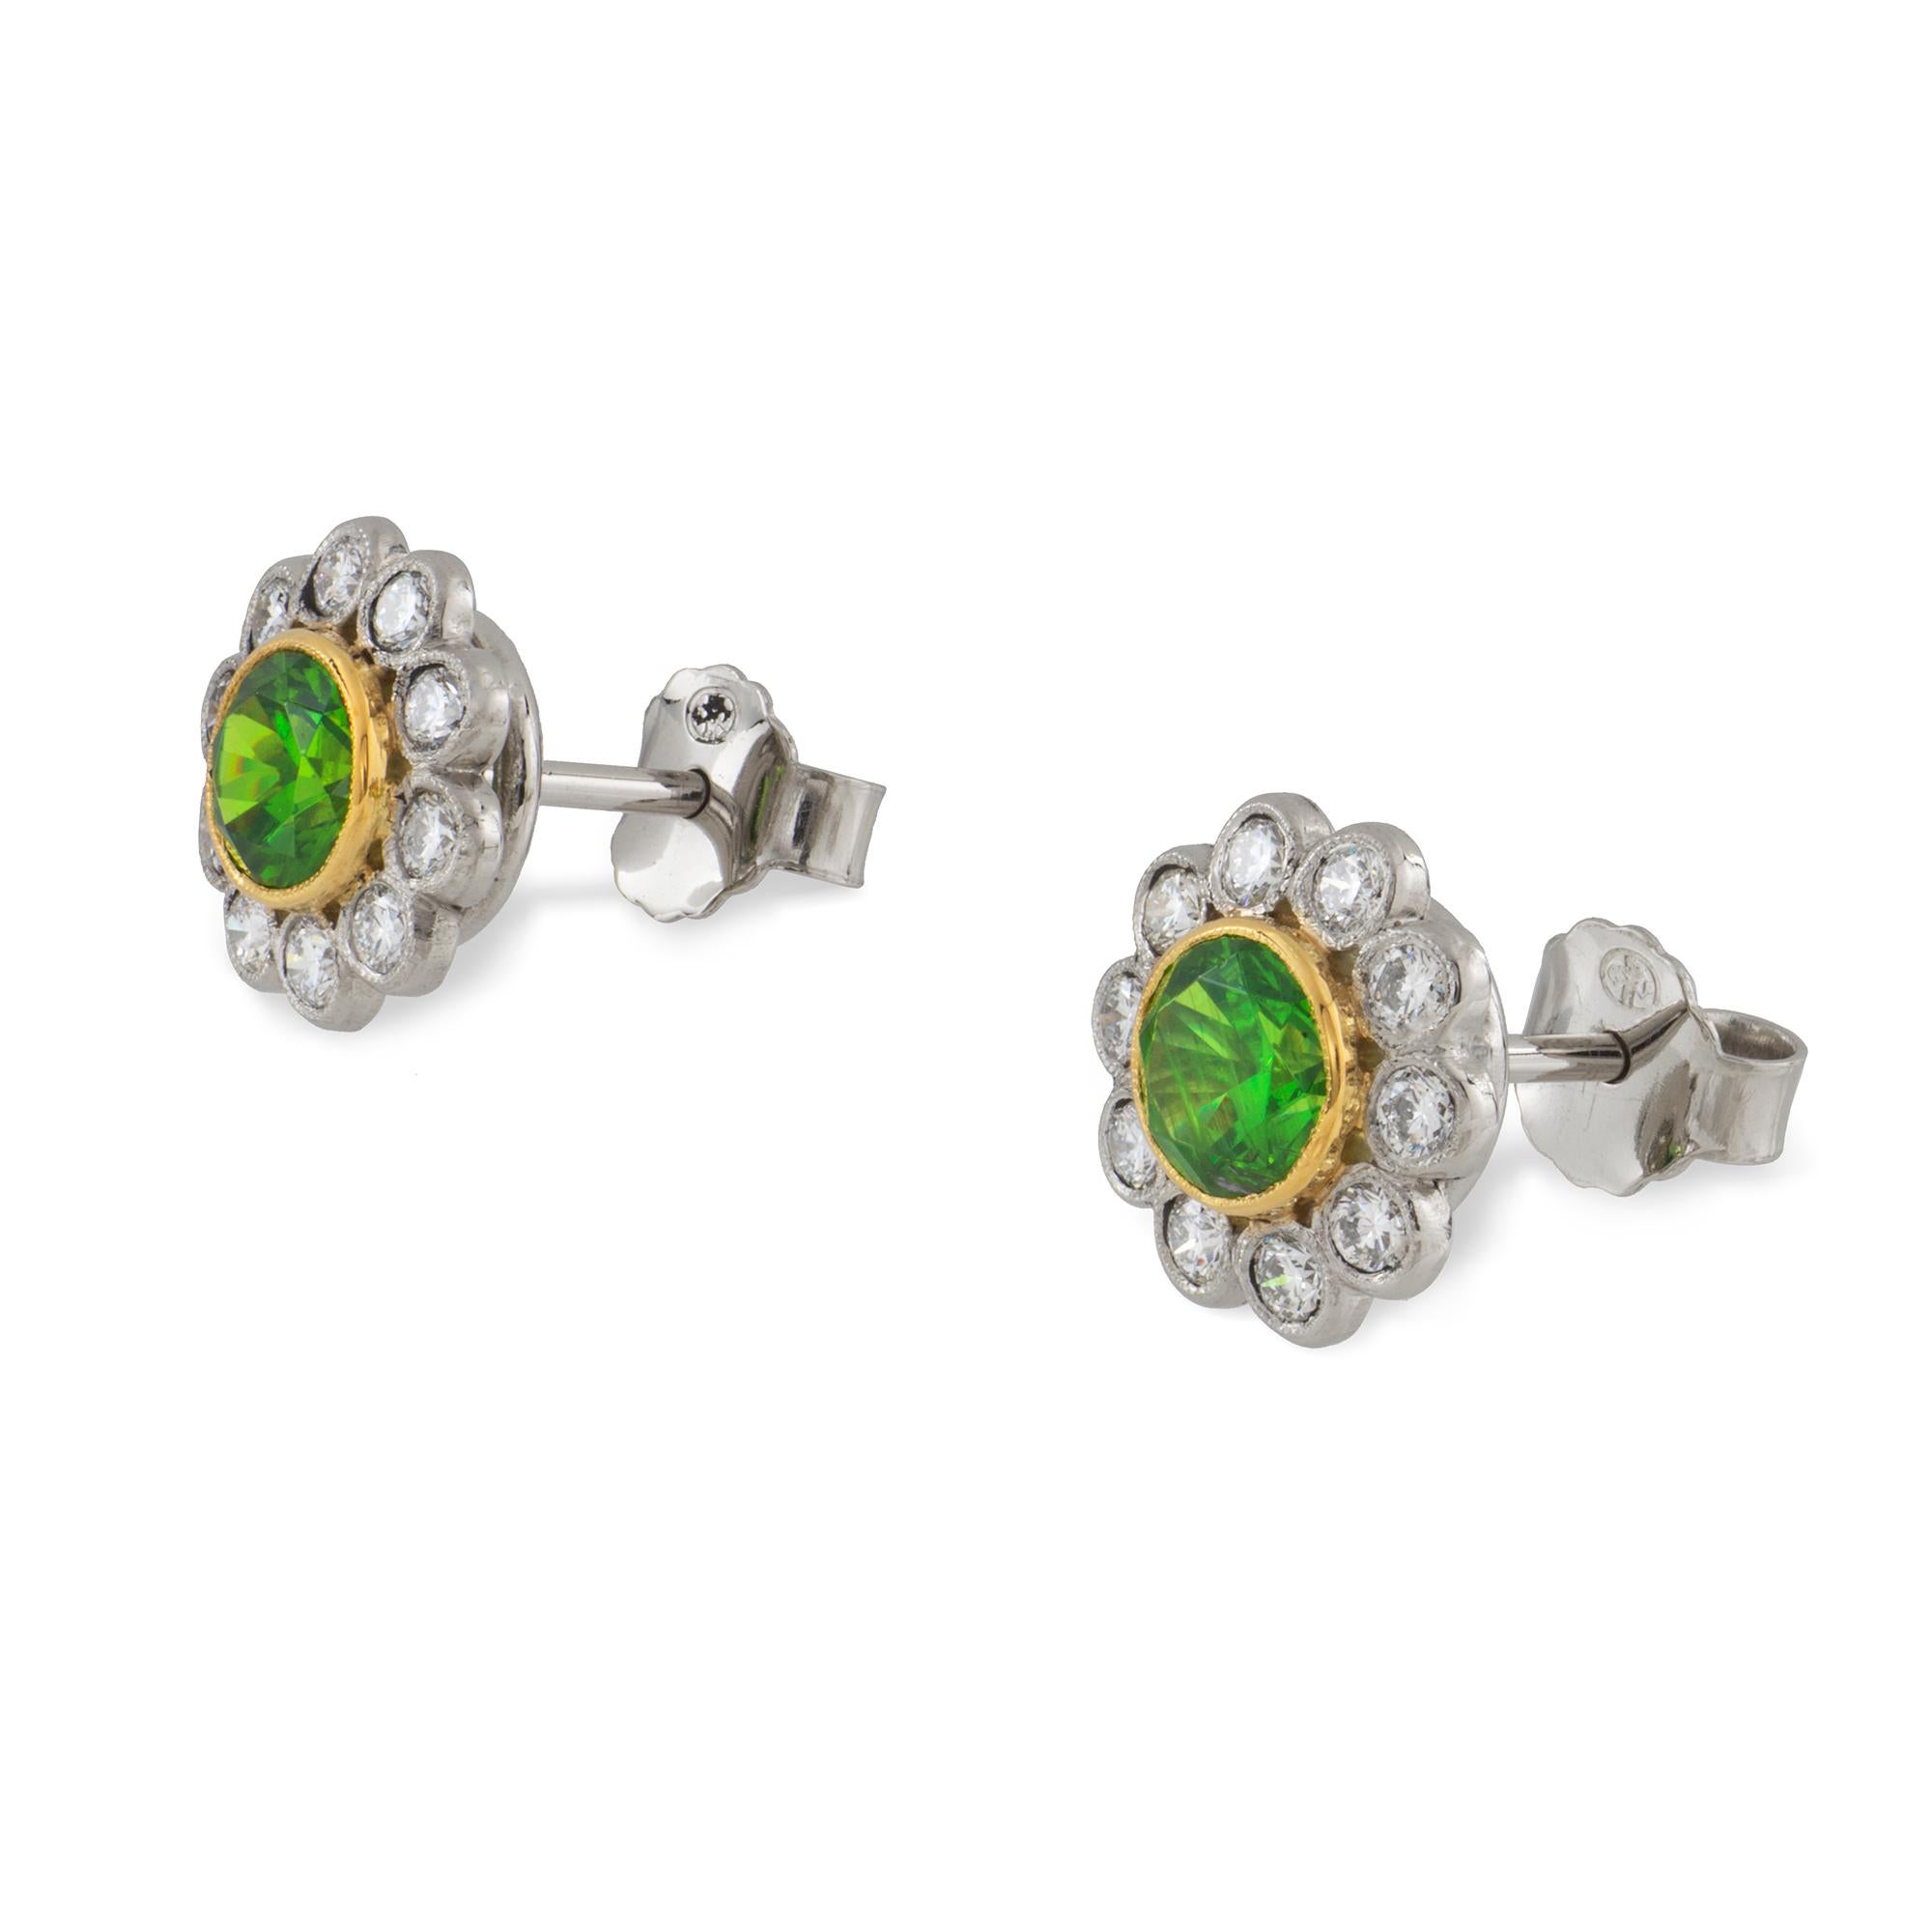 A pair of demantoid garnet and diamond cluster earrings, each demantoid millegrain-set to the centre of a round brilliant-cut diamond-set cluster, the demantoids have a total weight 1.48 carats and the diamonds weighing a total of 0.55 carats, all